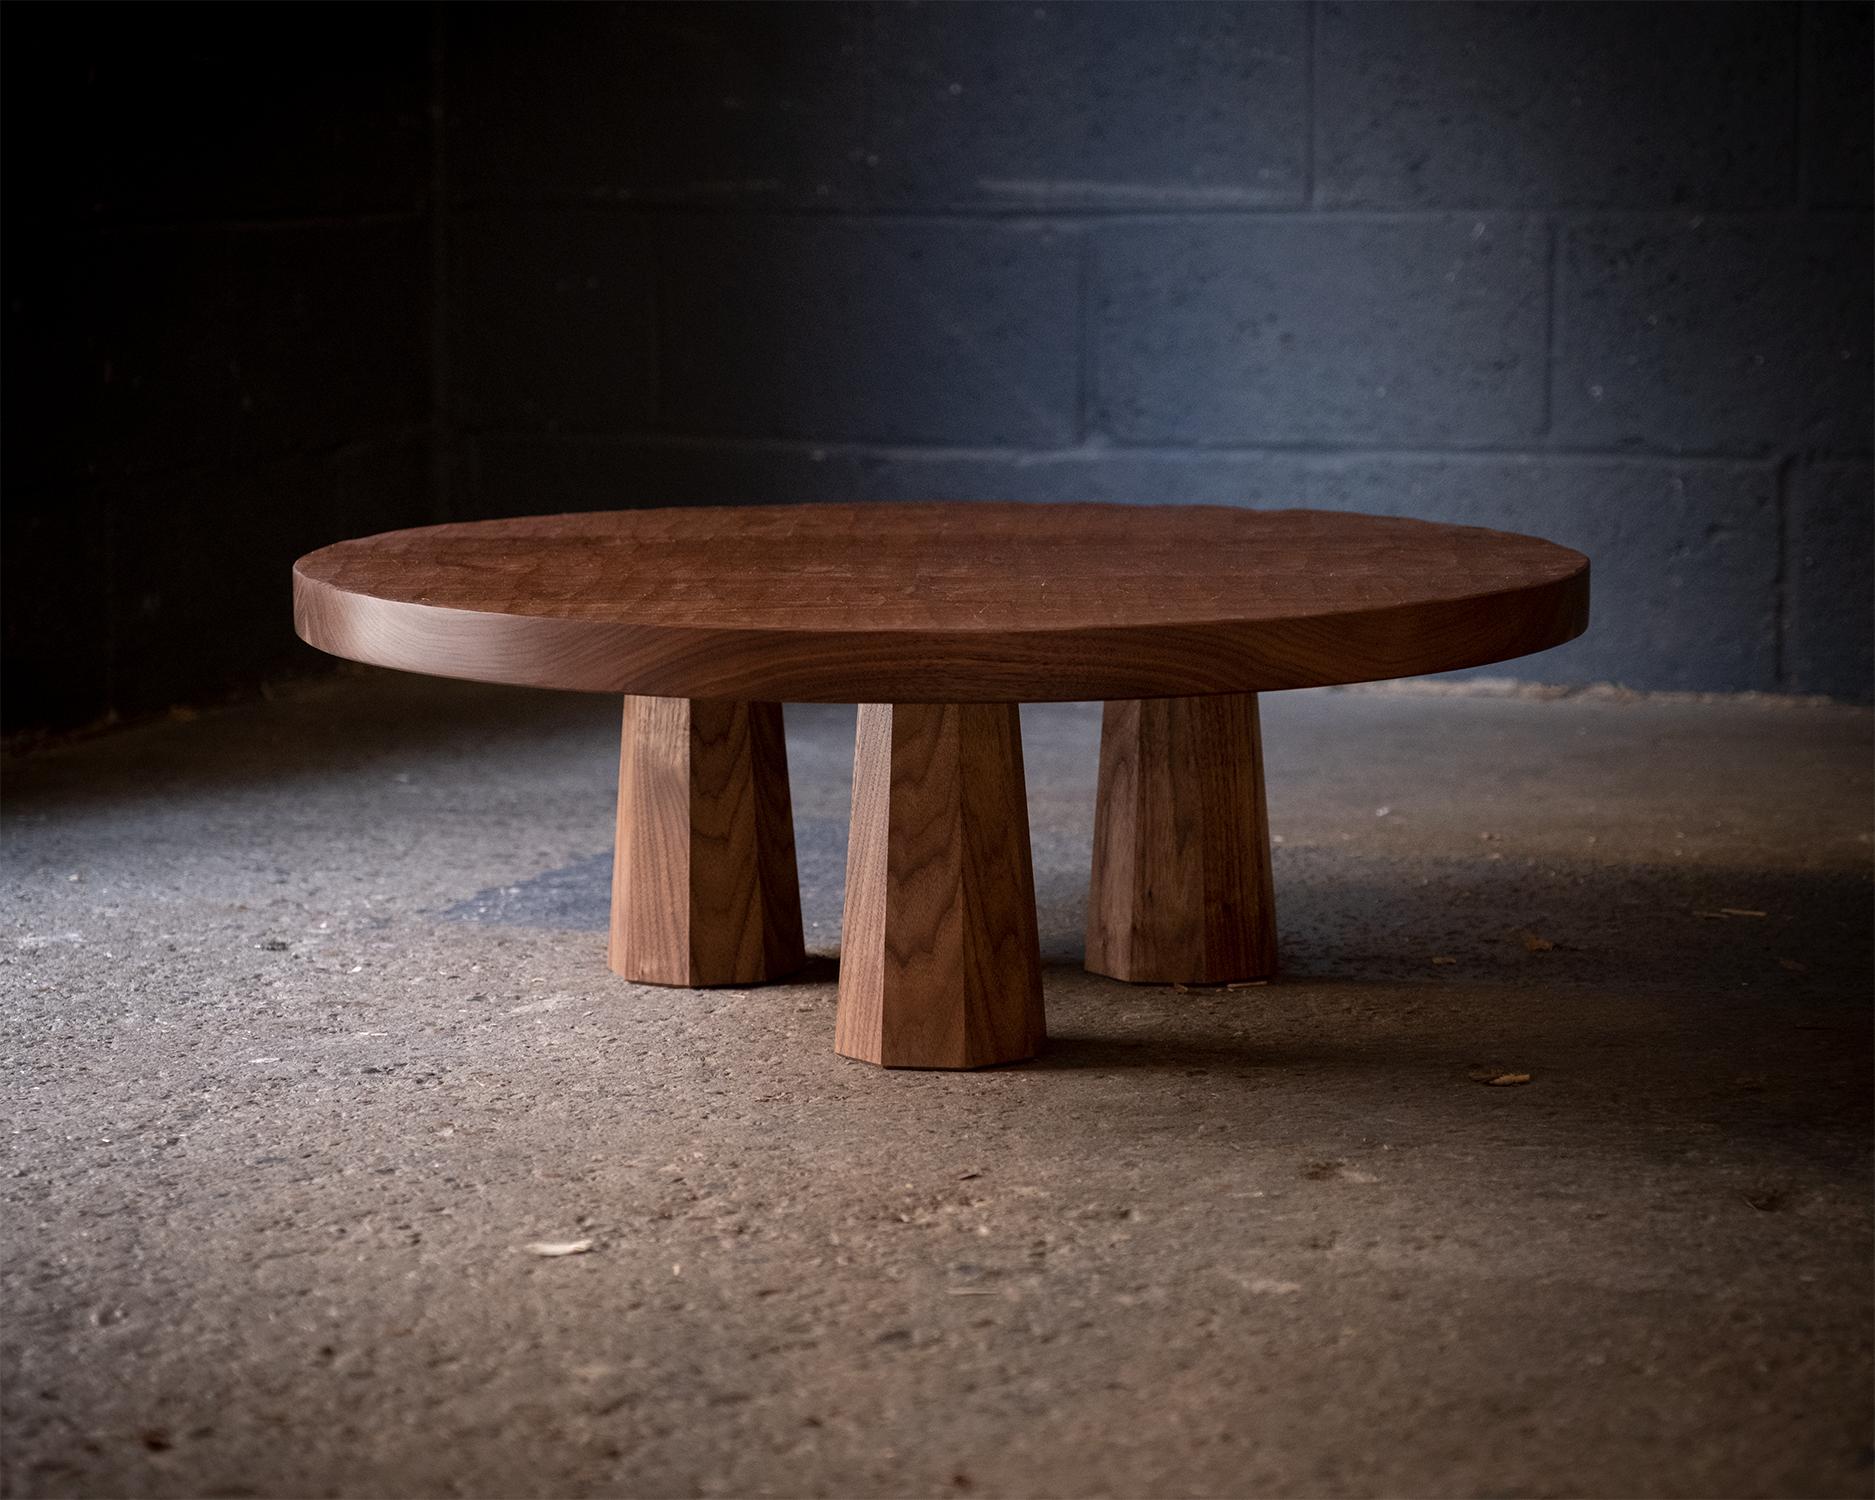 Made of premium-grade walnut, or a variety of other timber options, the piece features a prominent hand-carved texture across the top surface. The natural beauty of the timber is a key feature. Made of solid construction and sturdy legs, it is built